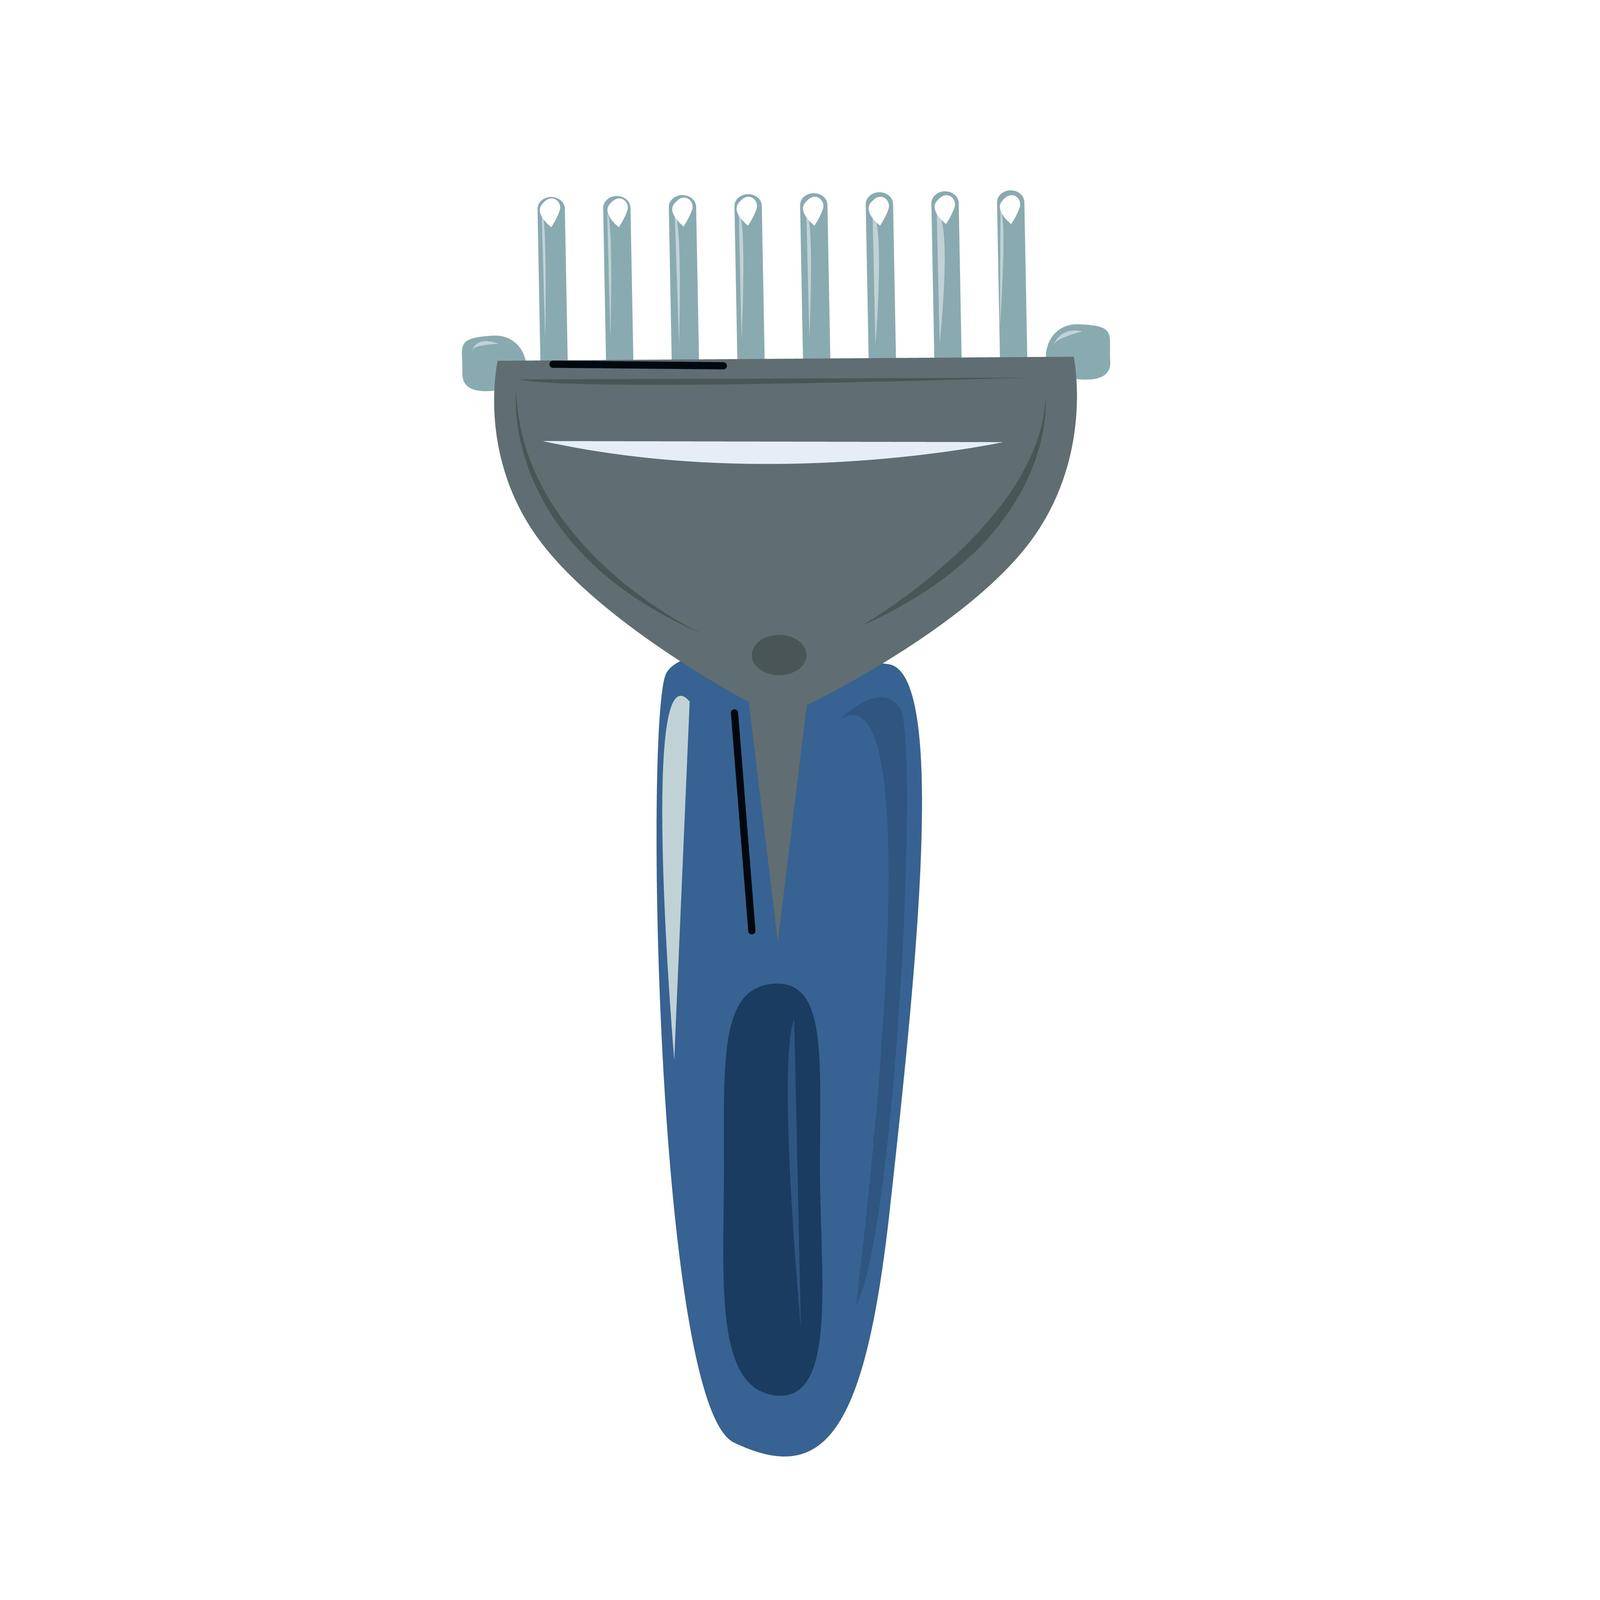 A comb for removing hair from pets or thinning it. A tool for caring for animals.